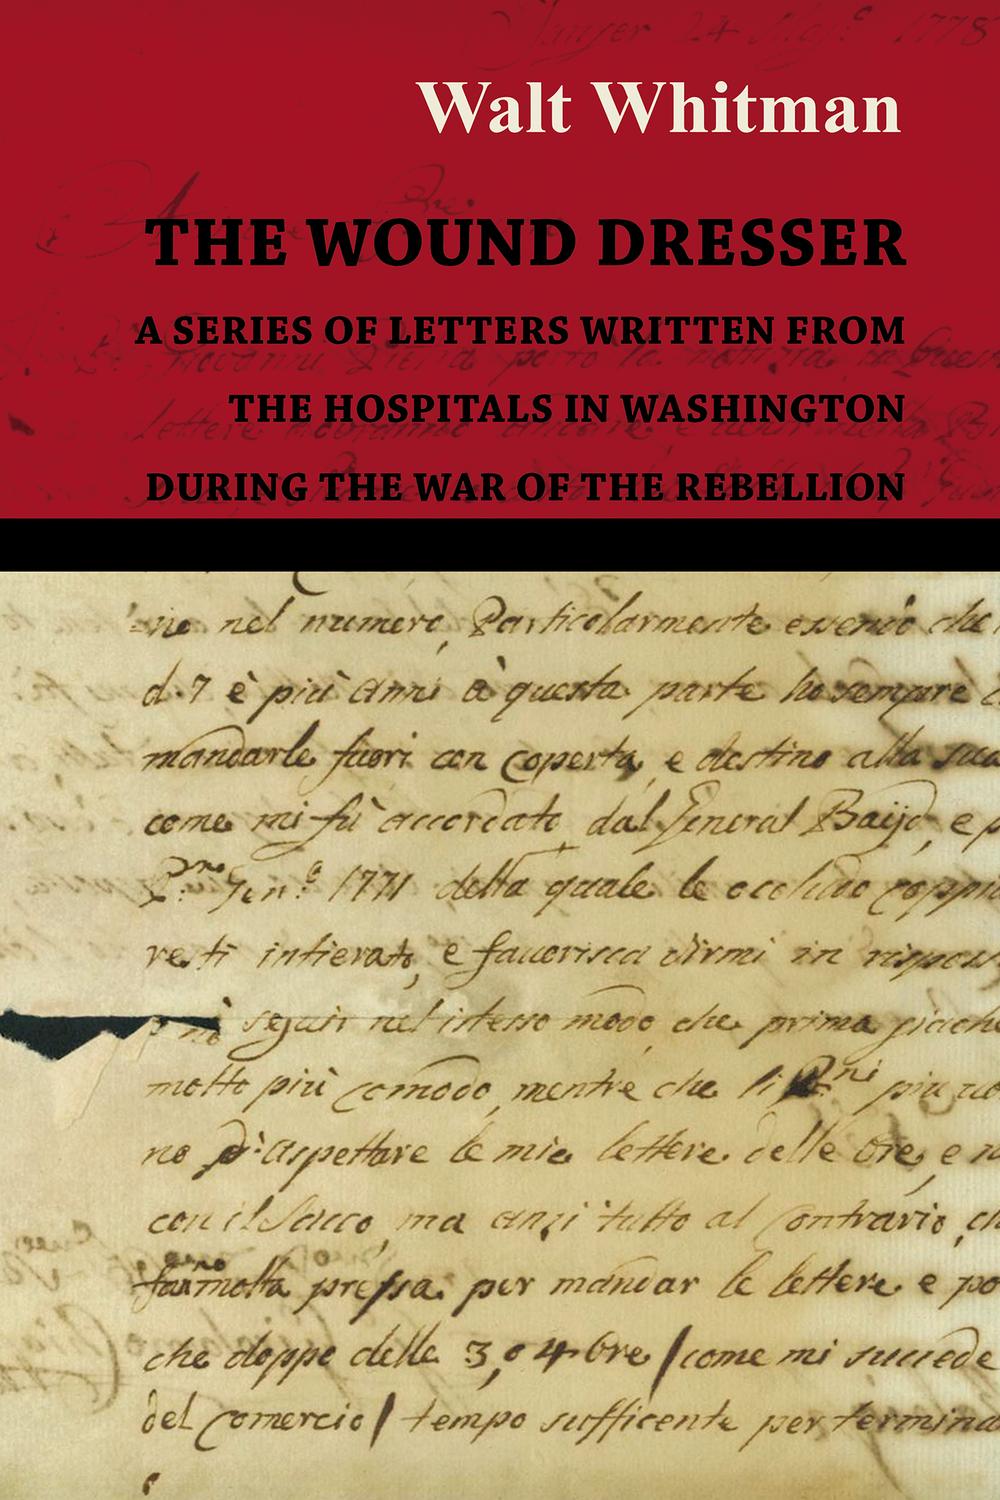 The Wound Dresser - A Series of Letters Written from the Hospitals in Washington During the War of the Rebellion - Walt Whitman,,